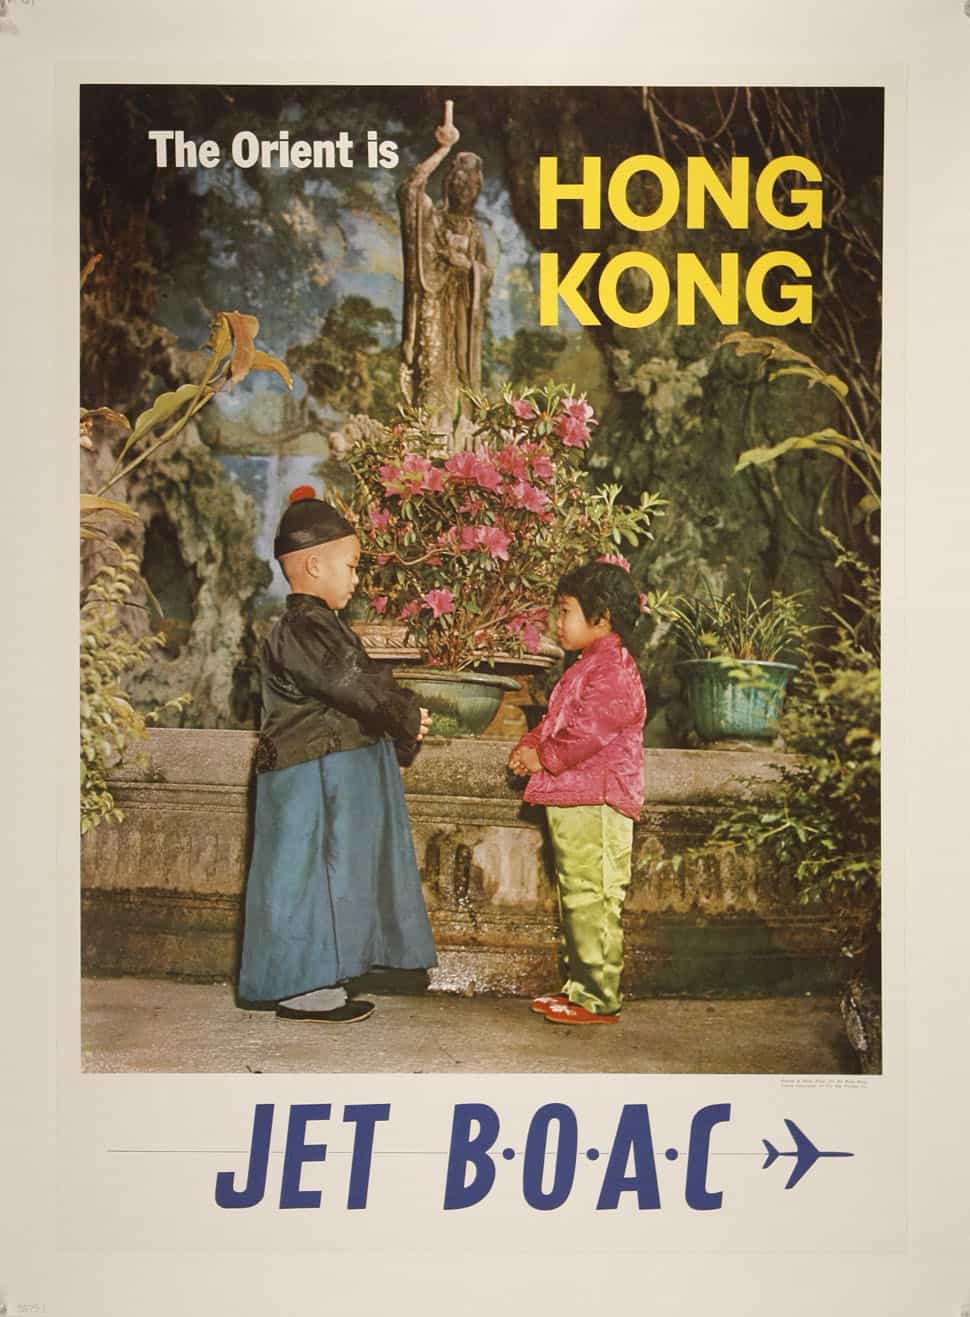 The Orient Is Hong Kong Jet Boac Poster 1960s Vintage Travel Poster